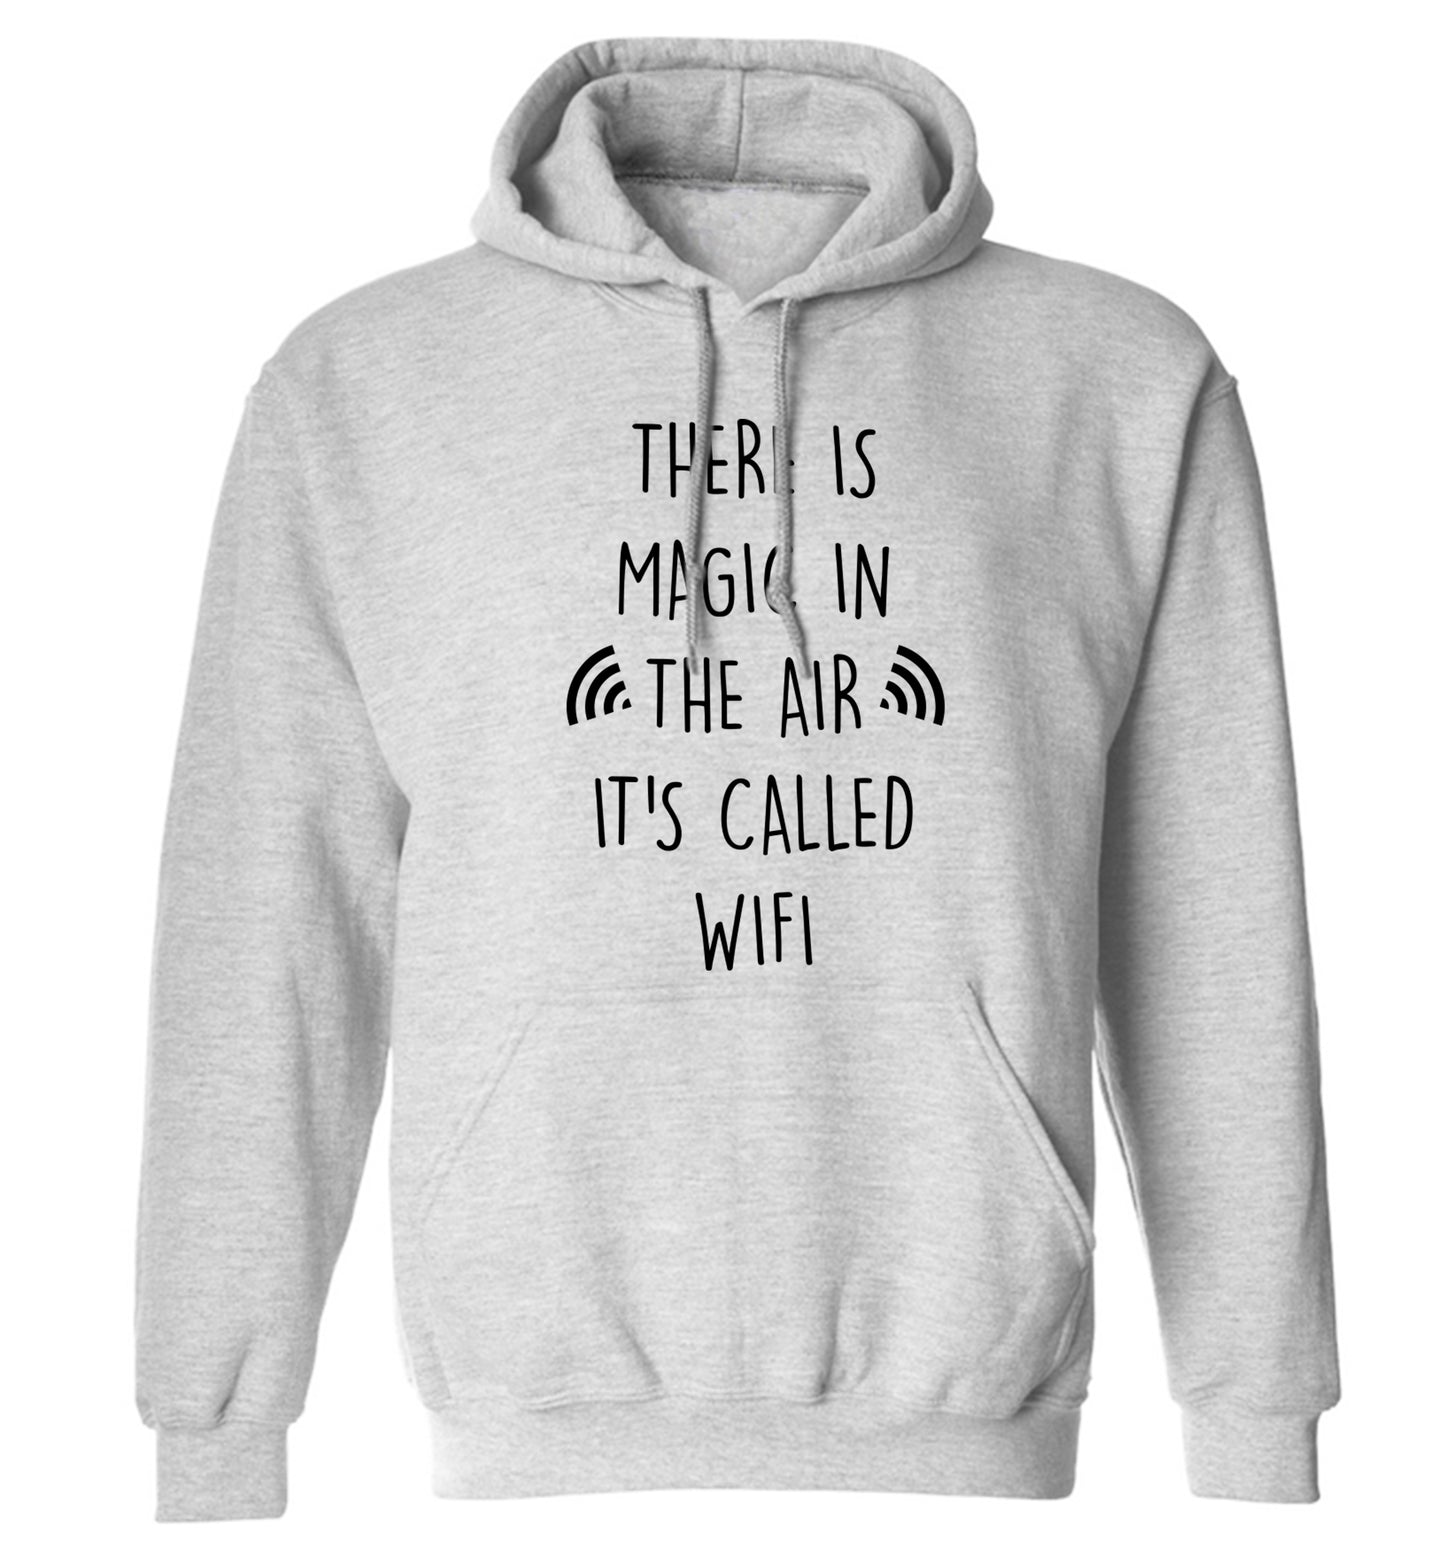 There is magic in the air it's called wifi adults unisex grey hoodie 2XL